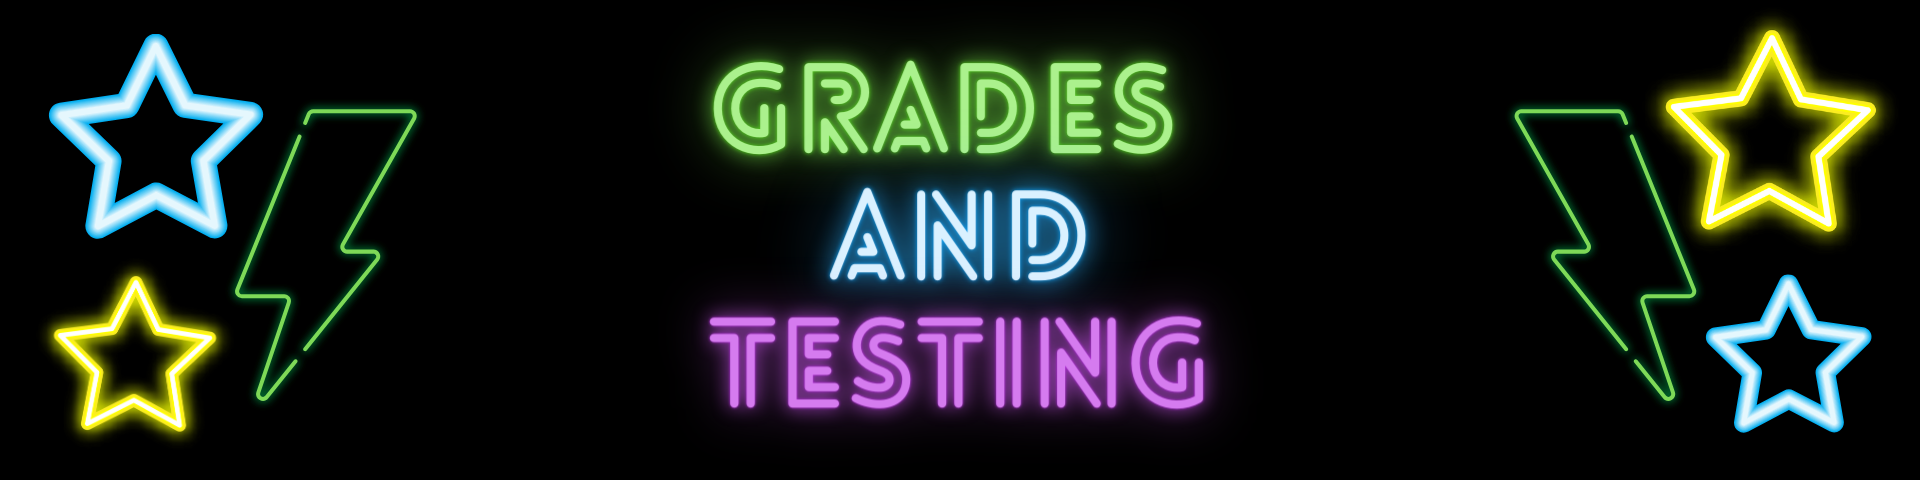 grades and testing banner